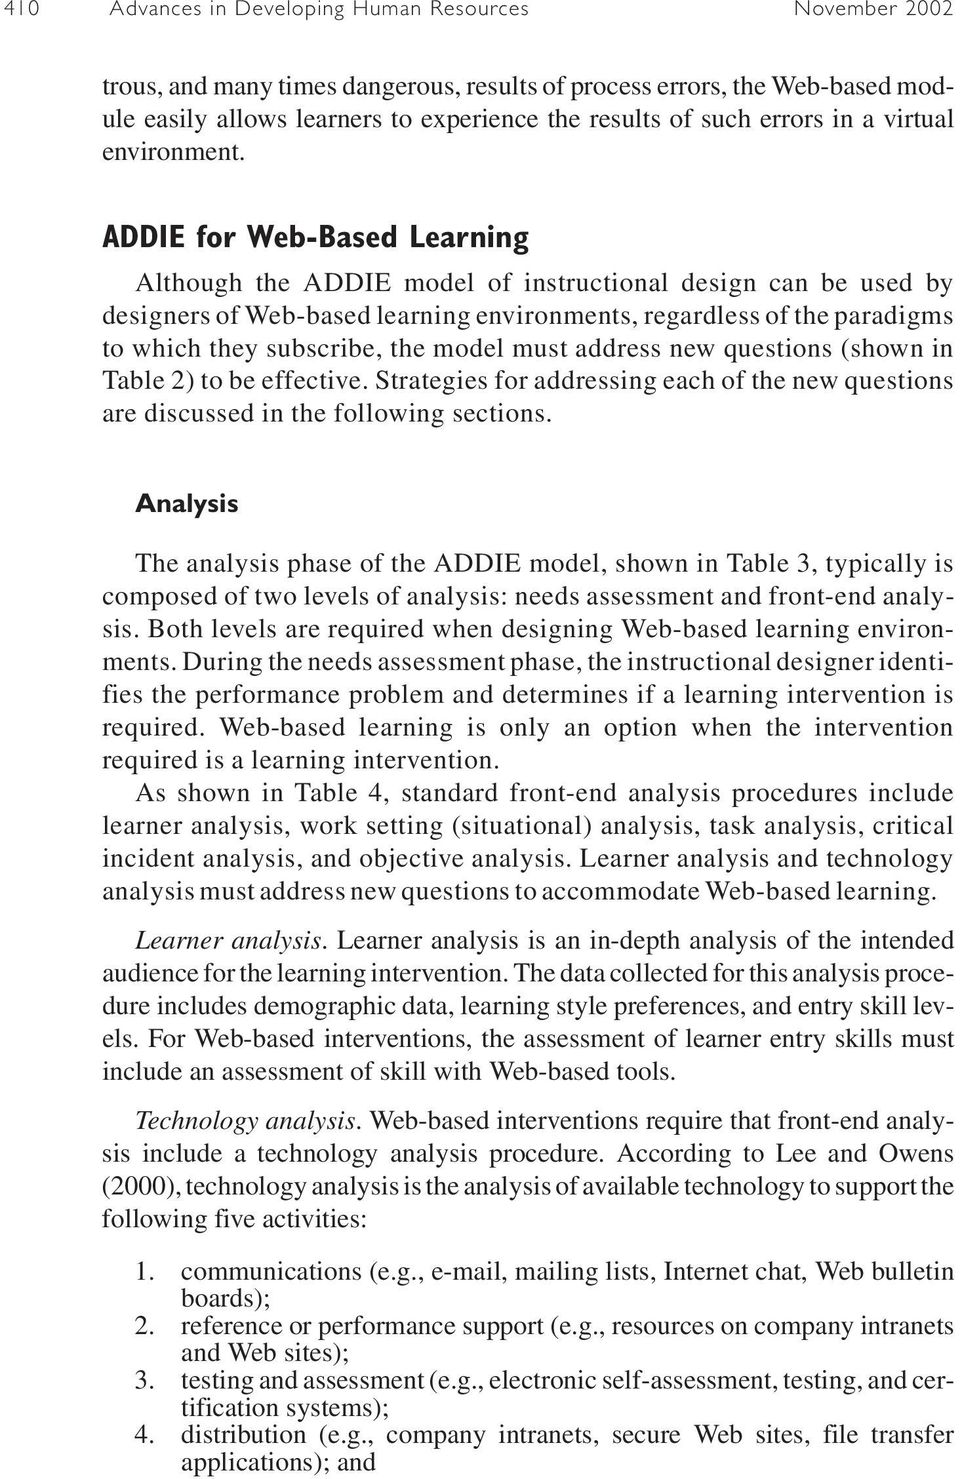 ADDIE for Web-Based Learning Although the ADDIE model of instructional design can be used by designers of Web-based learning environments, regardless of the paradigms to which they subscribe, the